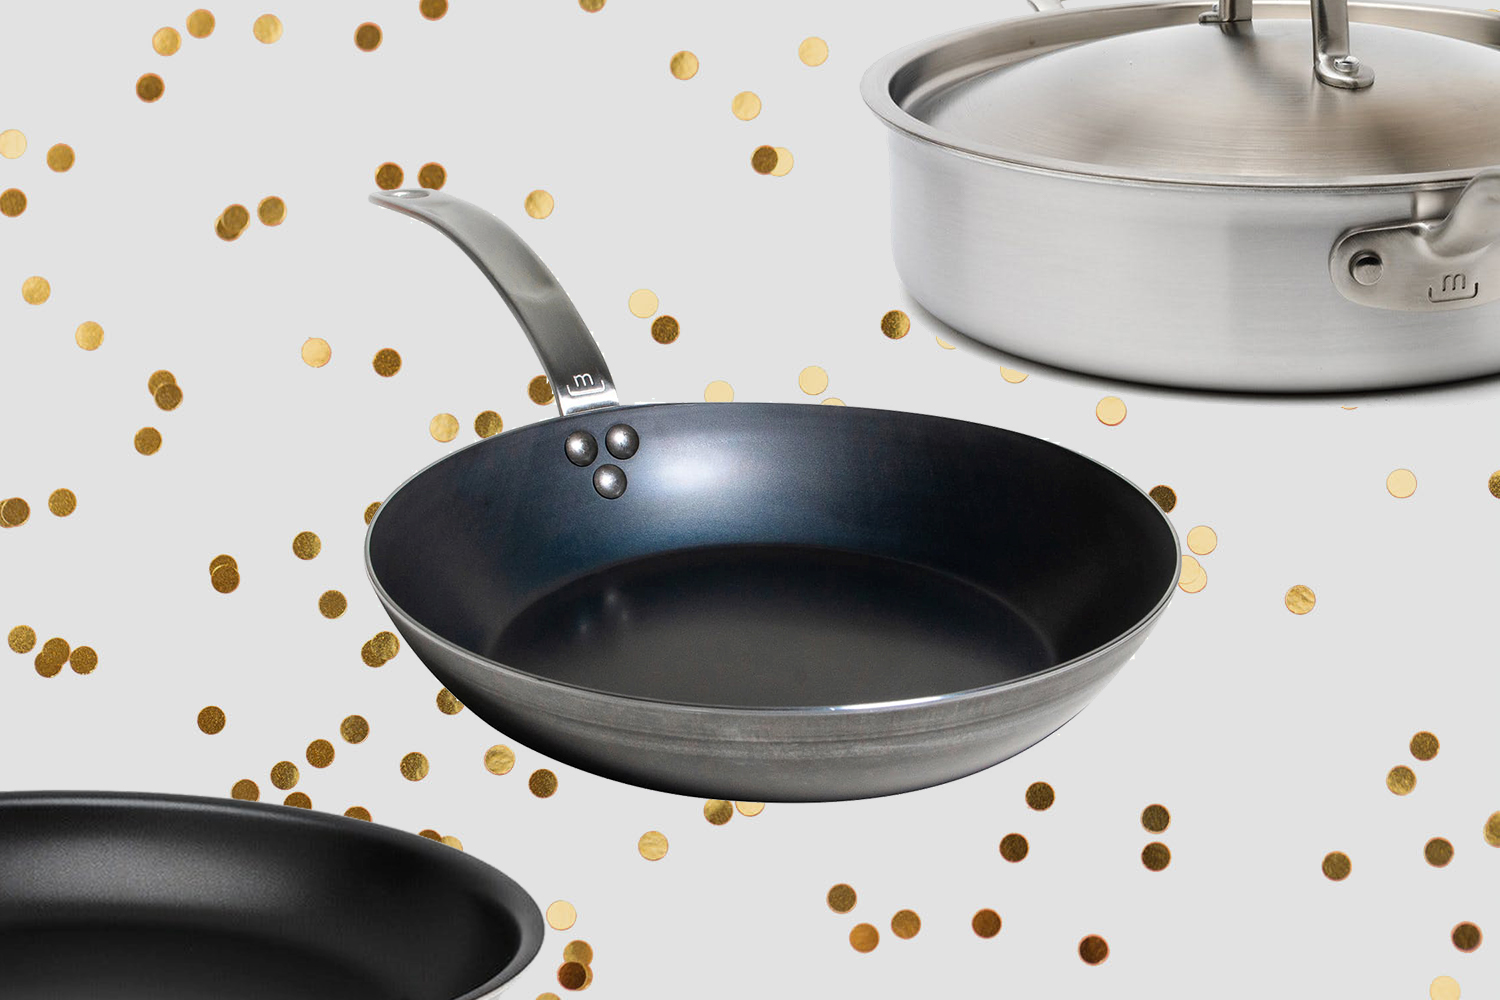 A nonstick frying pan, carbon steel pan and stainless steel saucepan from Made In, on sale for Cyber Monday 2021